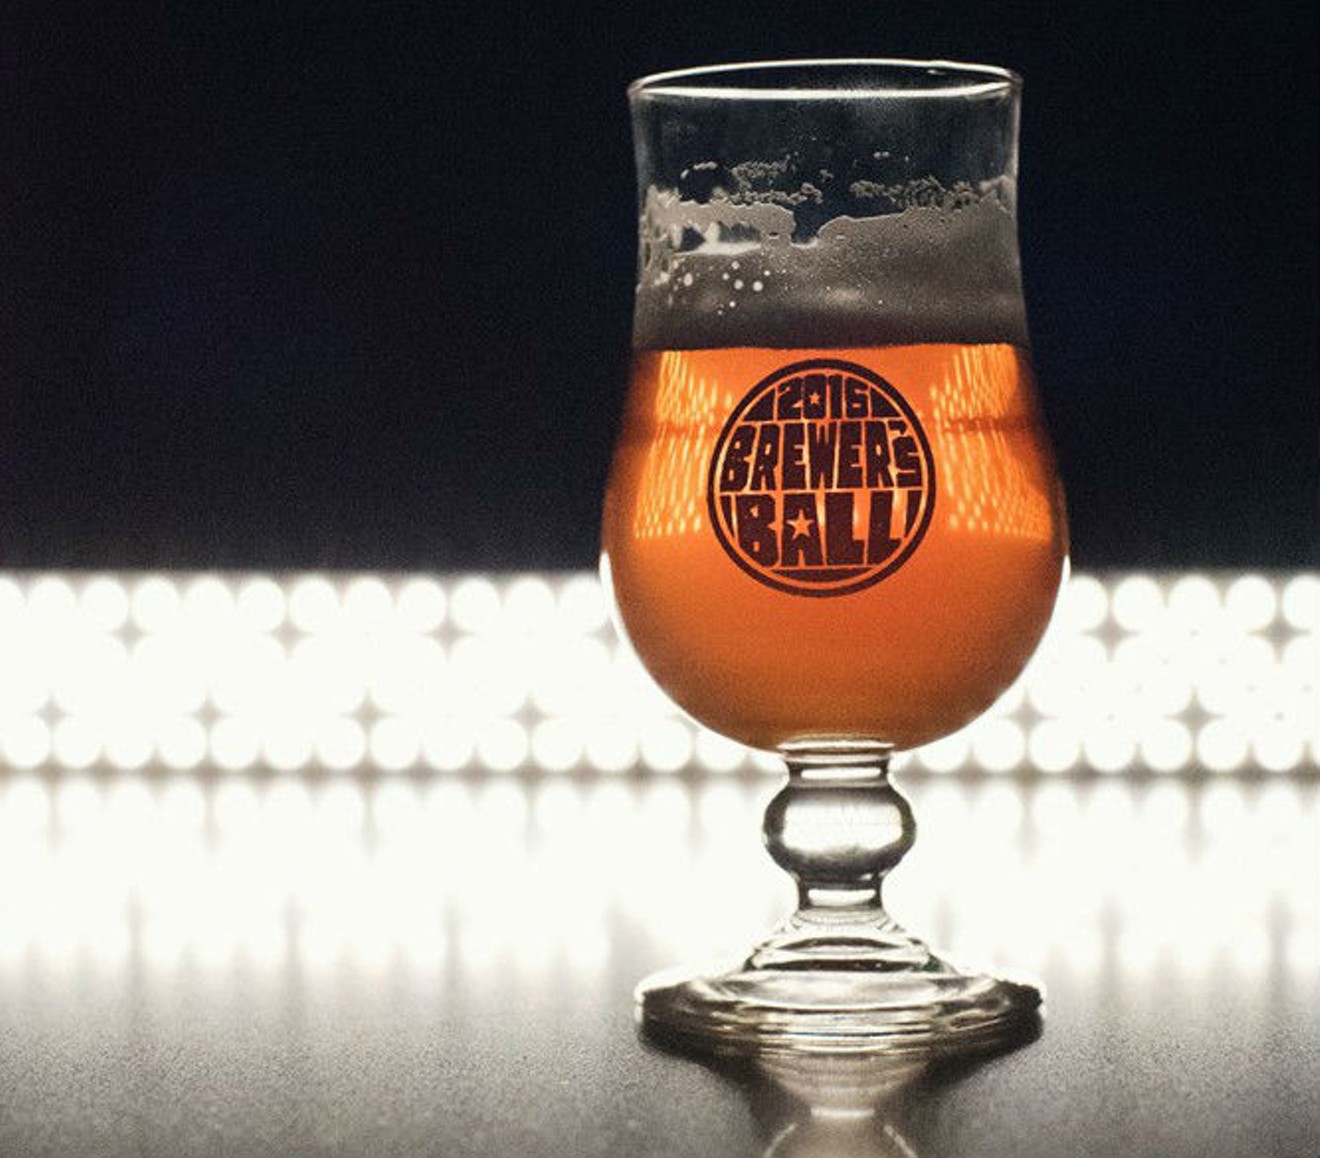 Whether you're hitting up the Brewers' Ball or just a few tastings, North Texas Beer Week is something to celebrate.